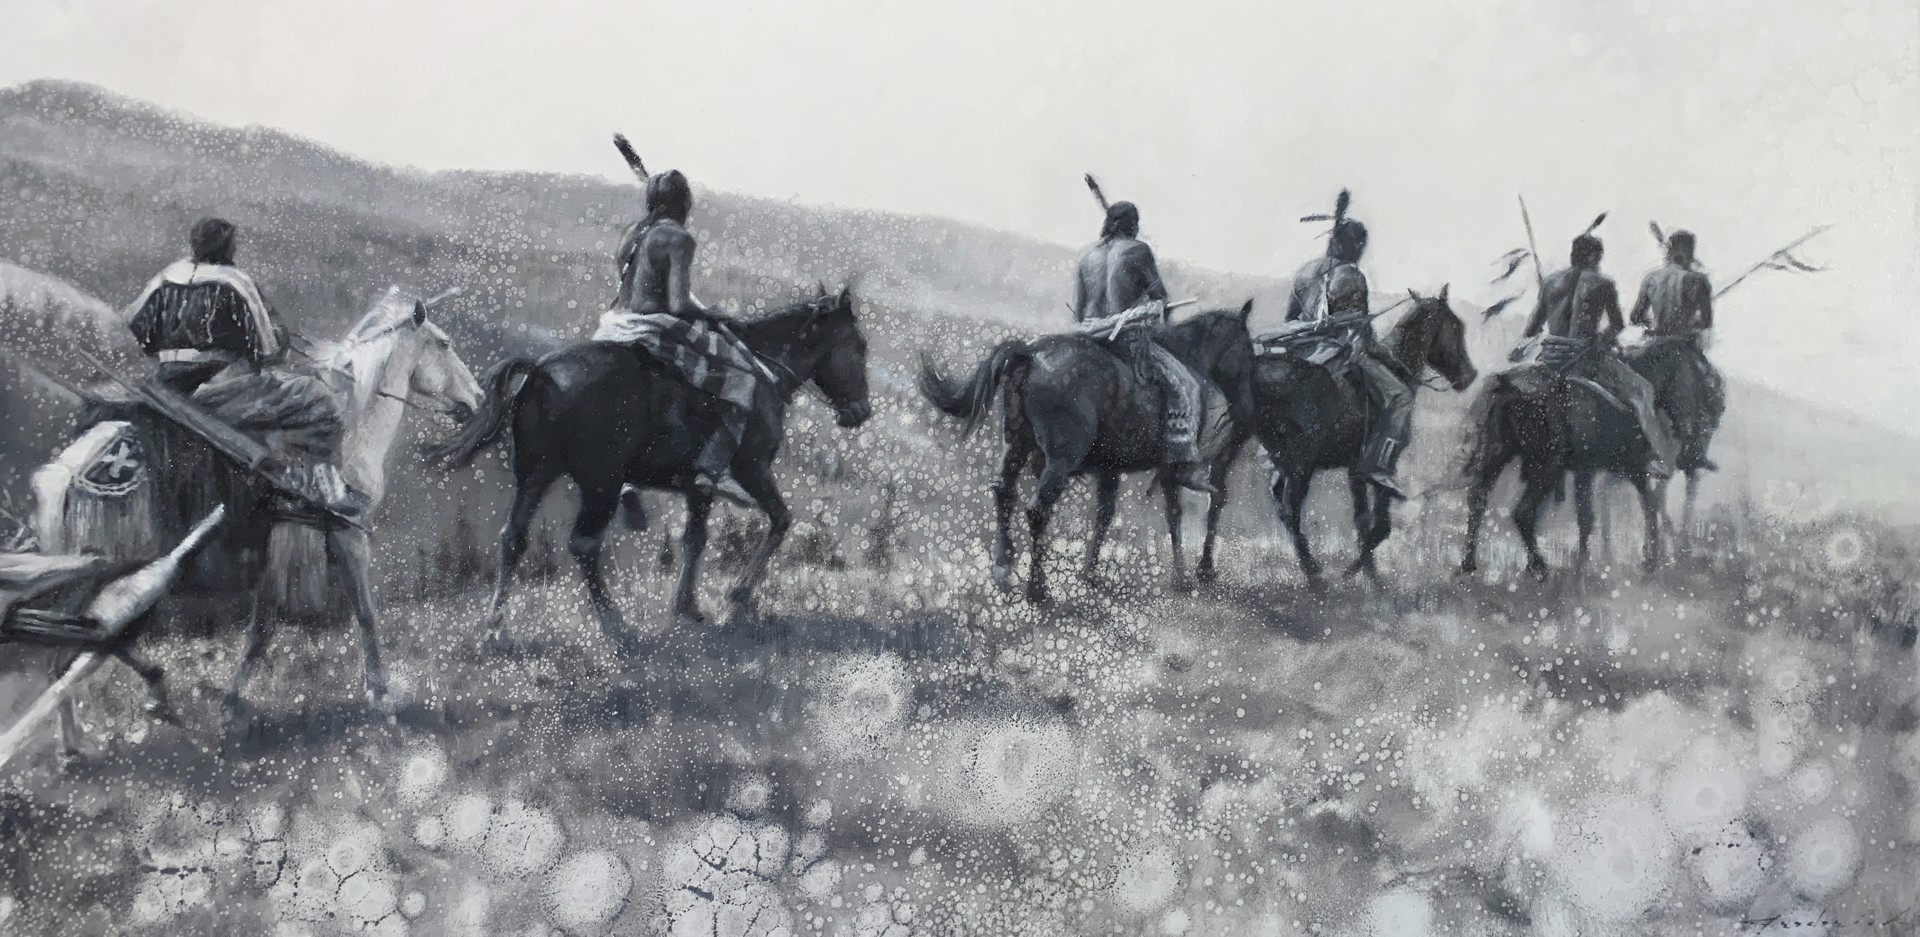 TRAIL MAKERS by David Frederick Riley